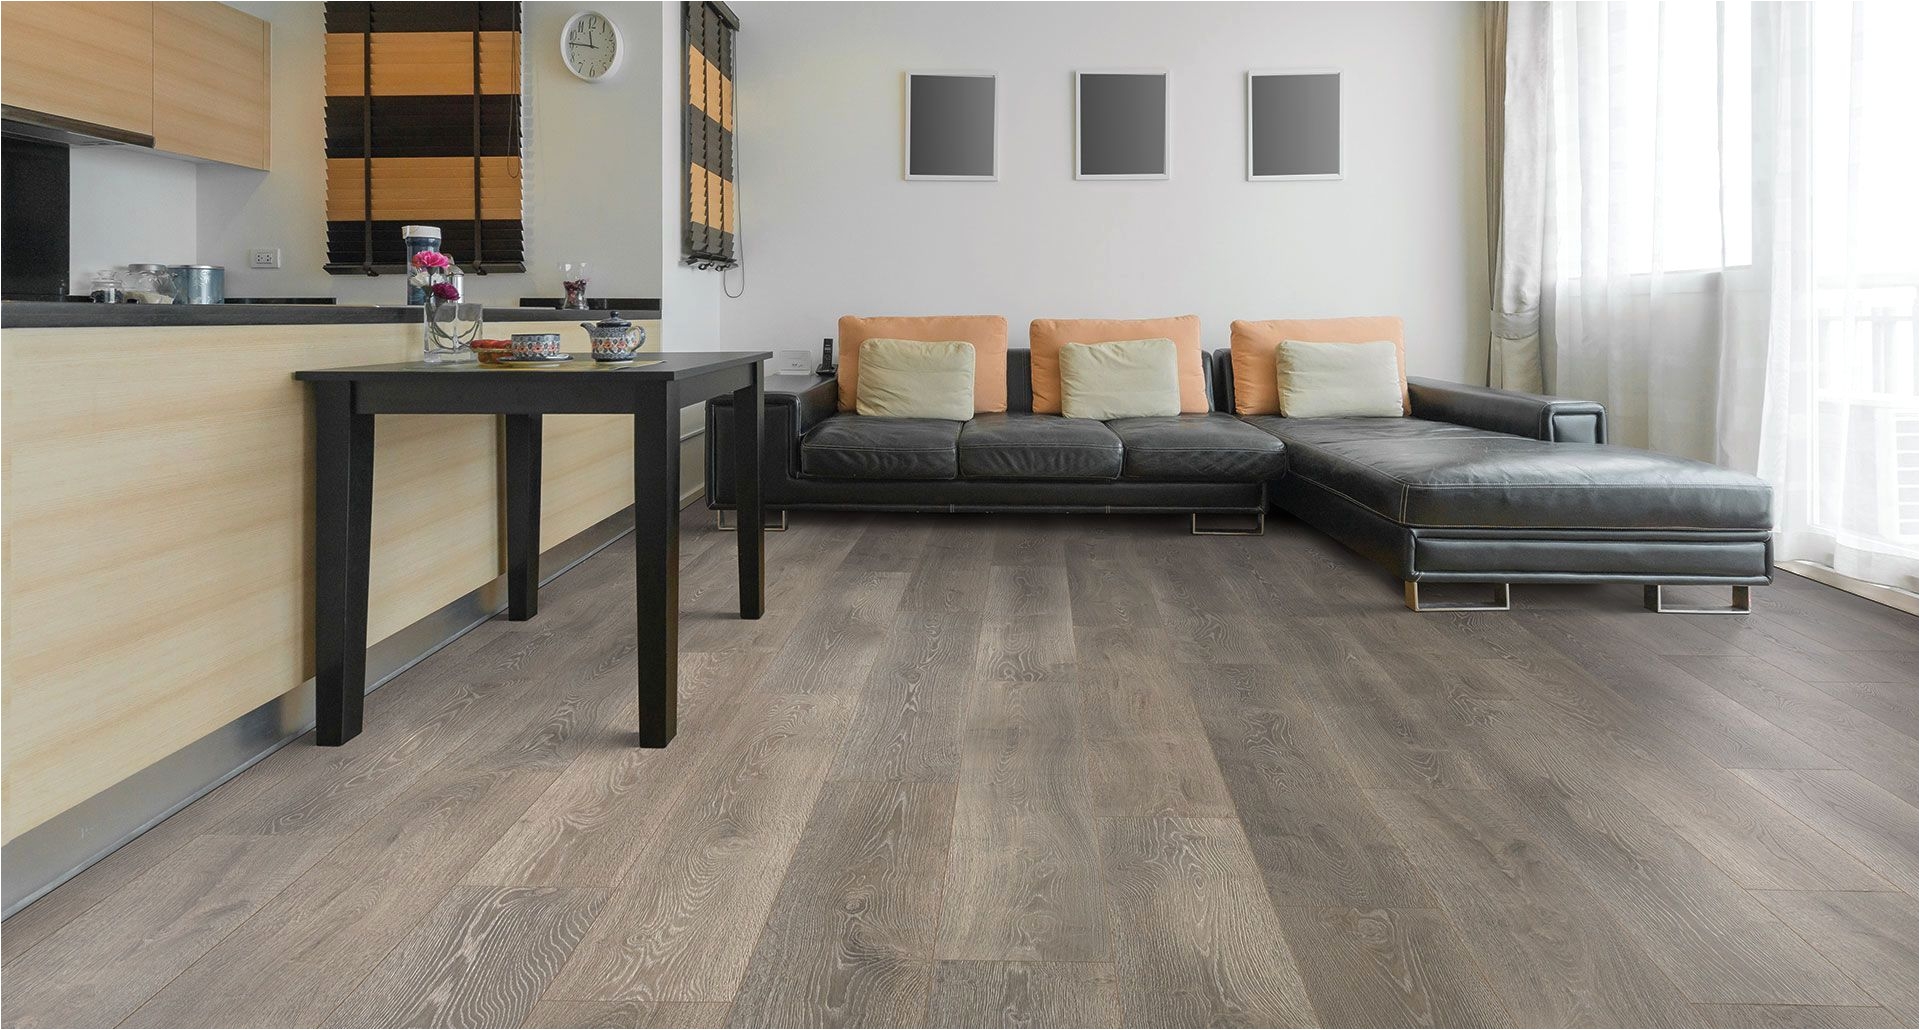 innovative pergo timbercraft laminate flooring with a series of unique features that create an authentic hardwood